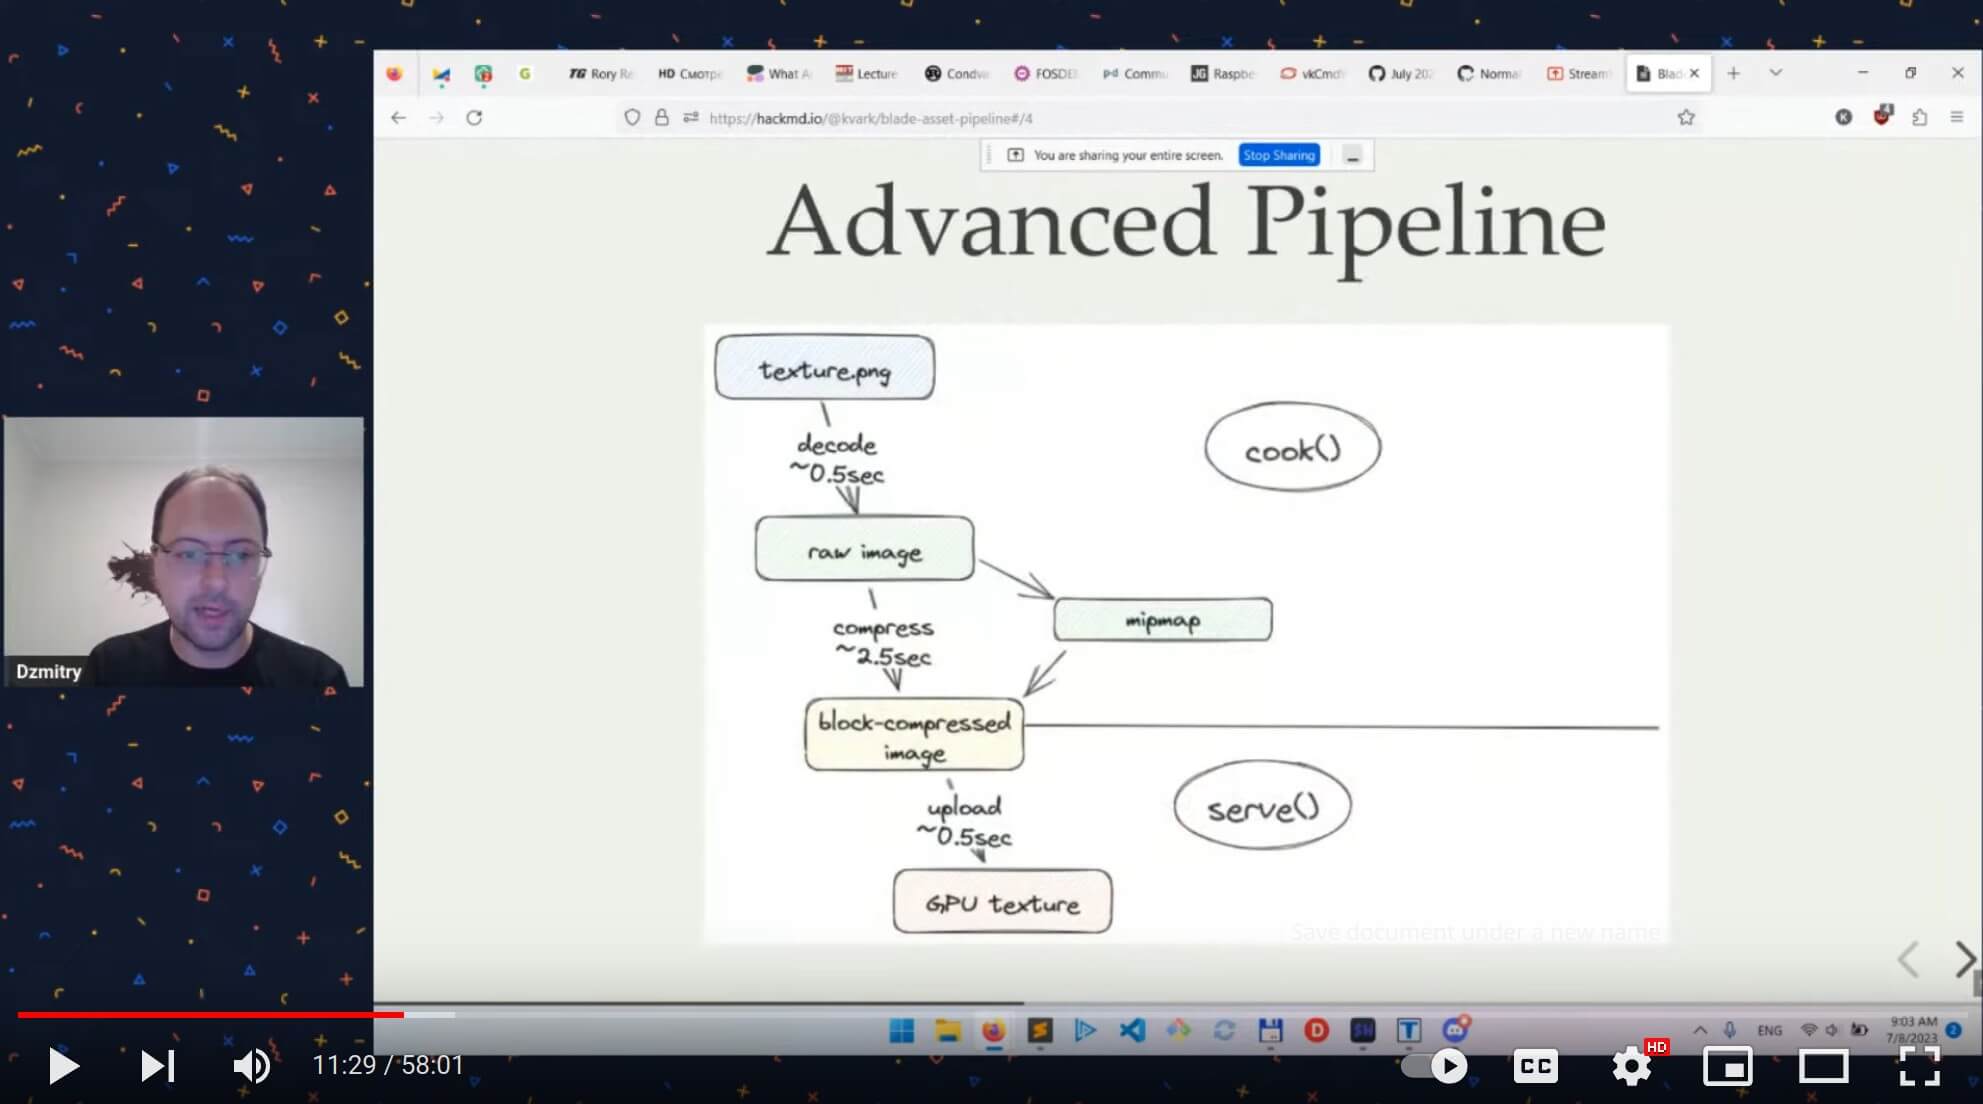 YouTube preview: "Blade: Advanced Pipeline" slide showing a texture diagram